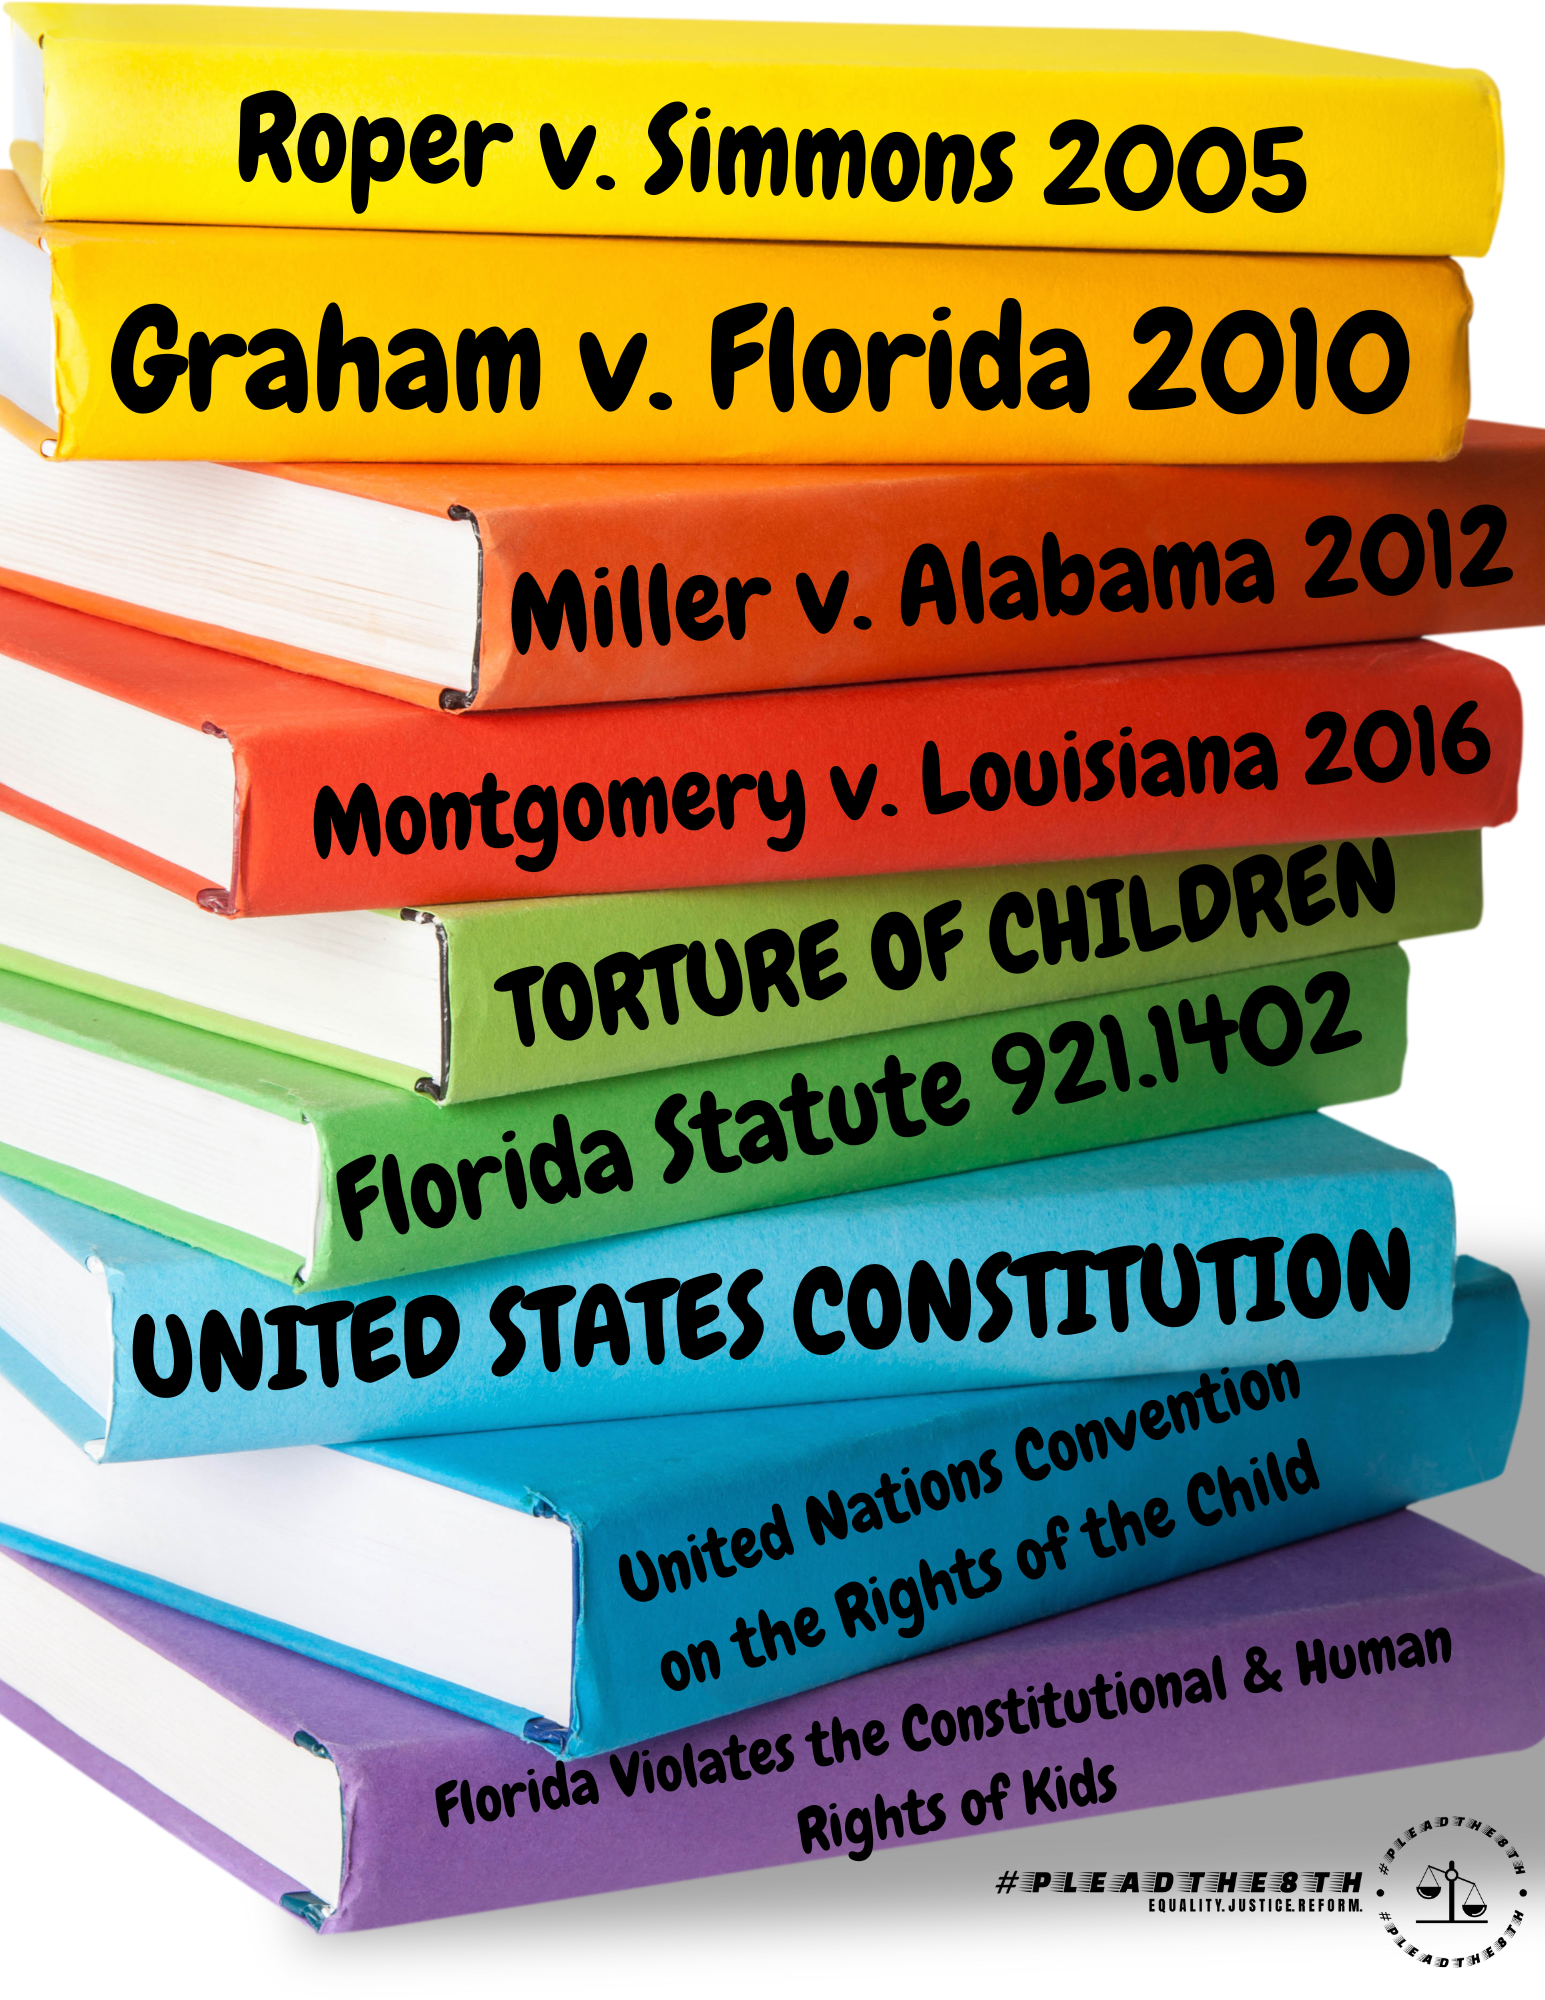 roper v. Simmons, graham v. Florida, miller v. Alabama, f.s. 921.1402, US constitution, United Nations convention on the rights of the child, Torture of children. Montgomery v. Louisiana